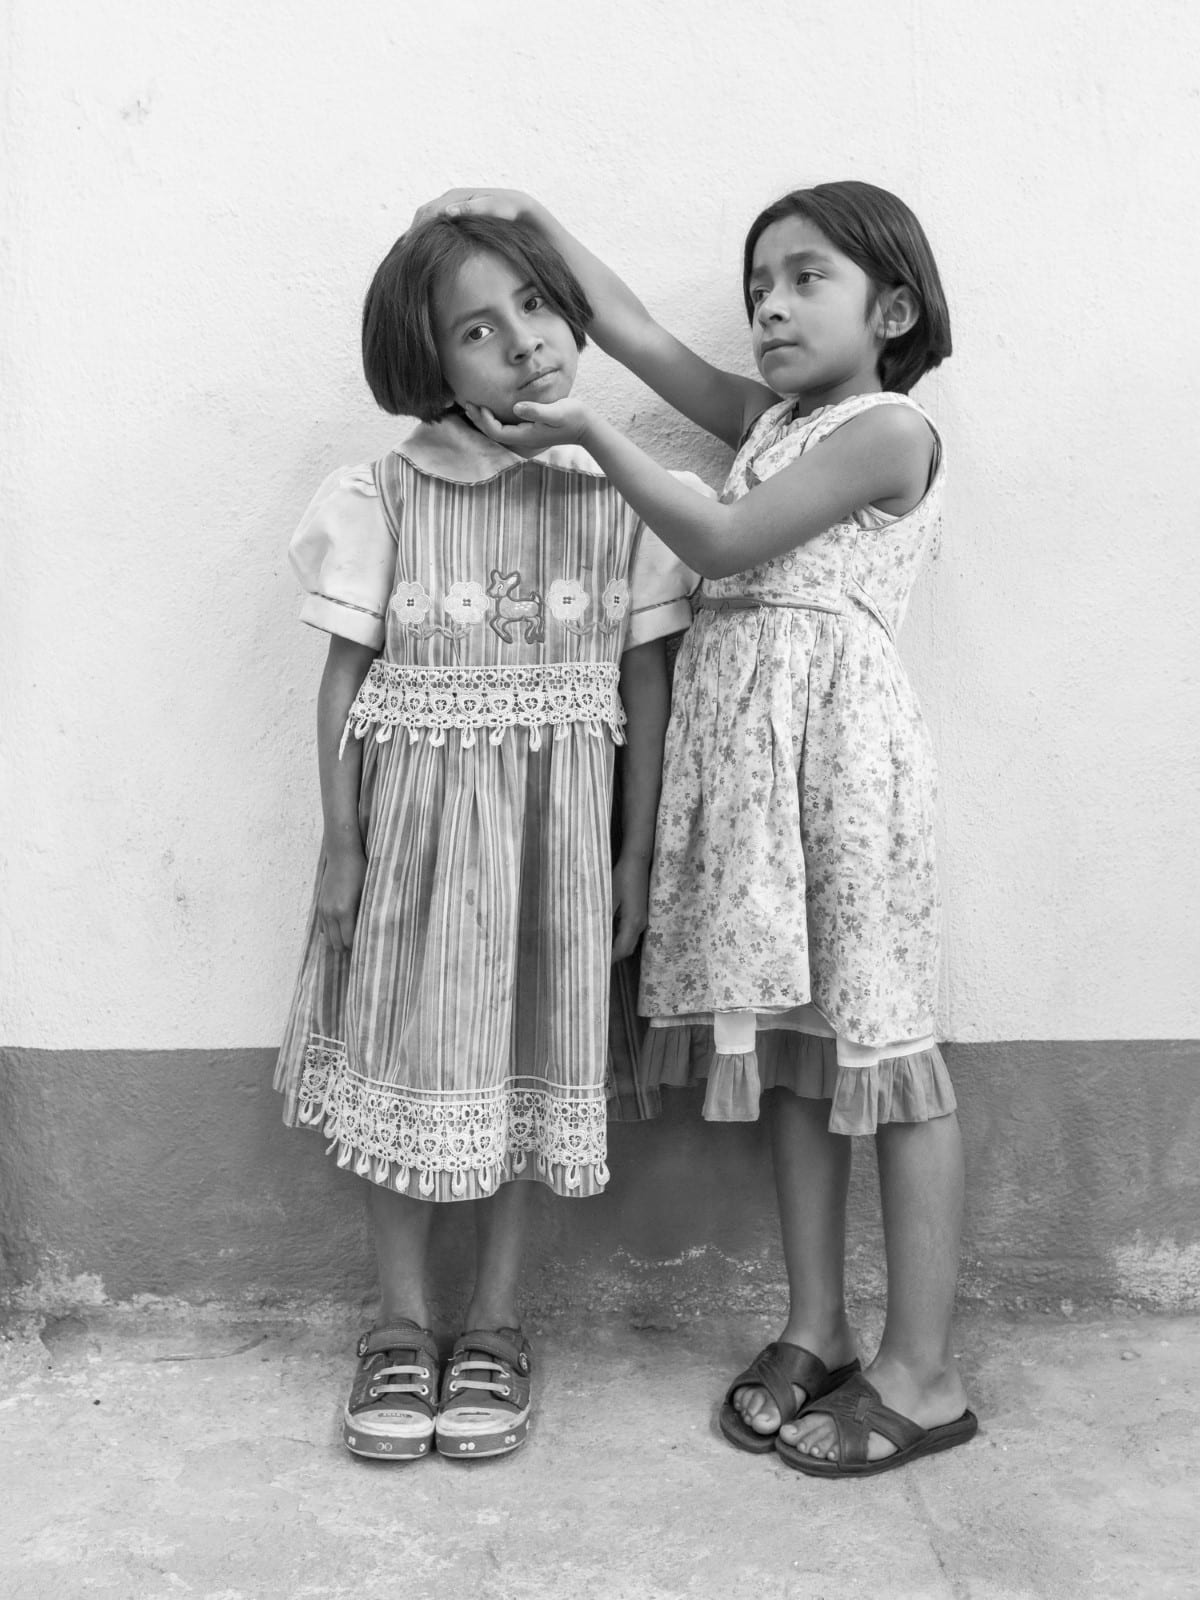 Two young girls from an orphanage in Mexico